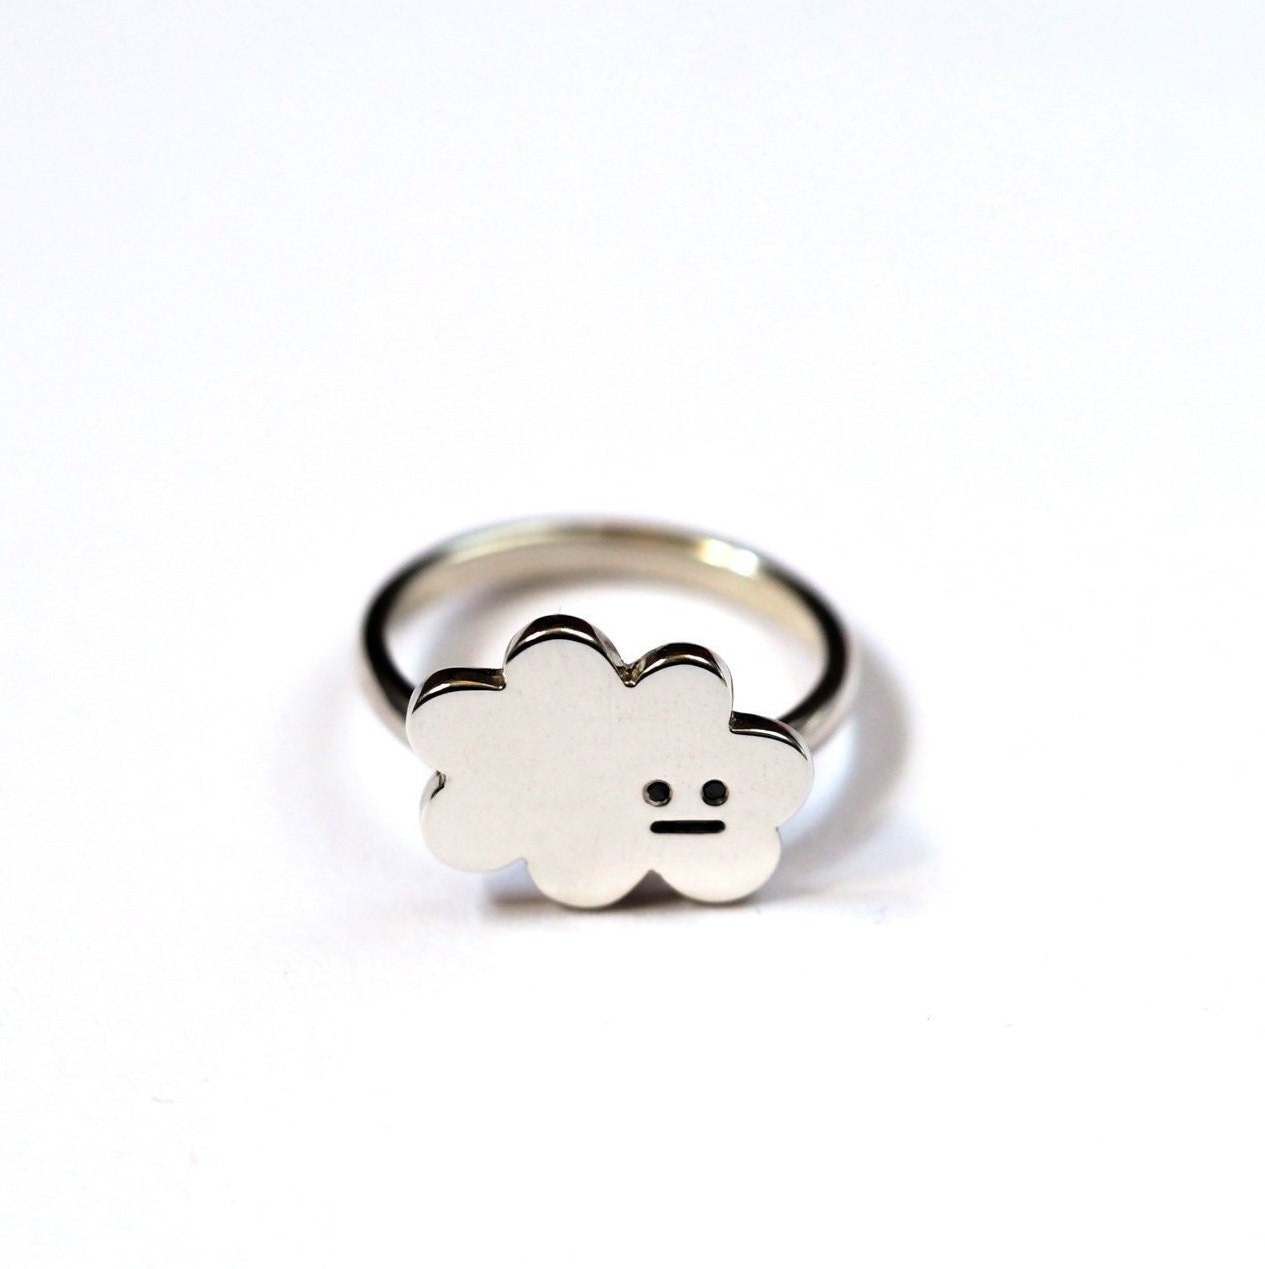 Puffy Cloud Ring - Recycled Sterling Silver and Black Diamond